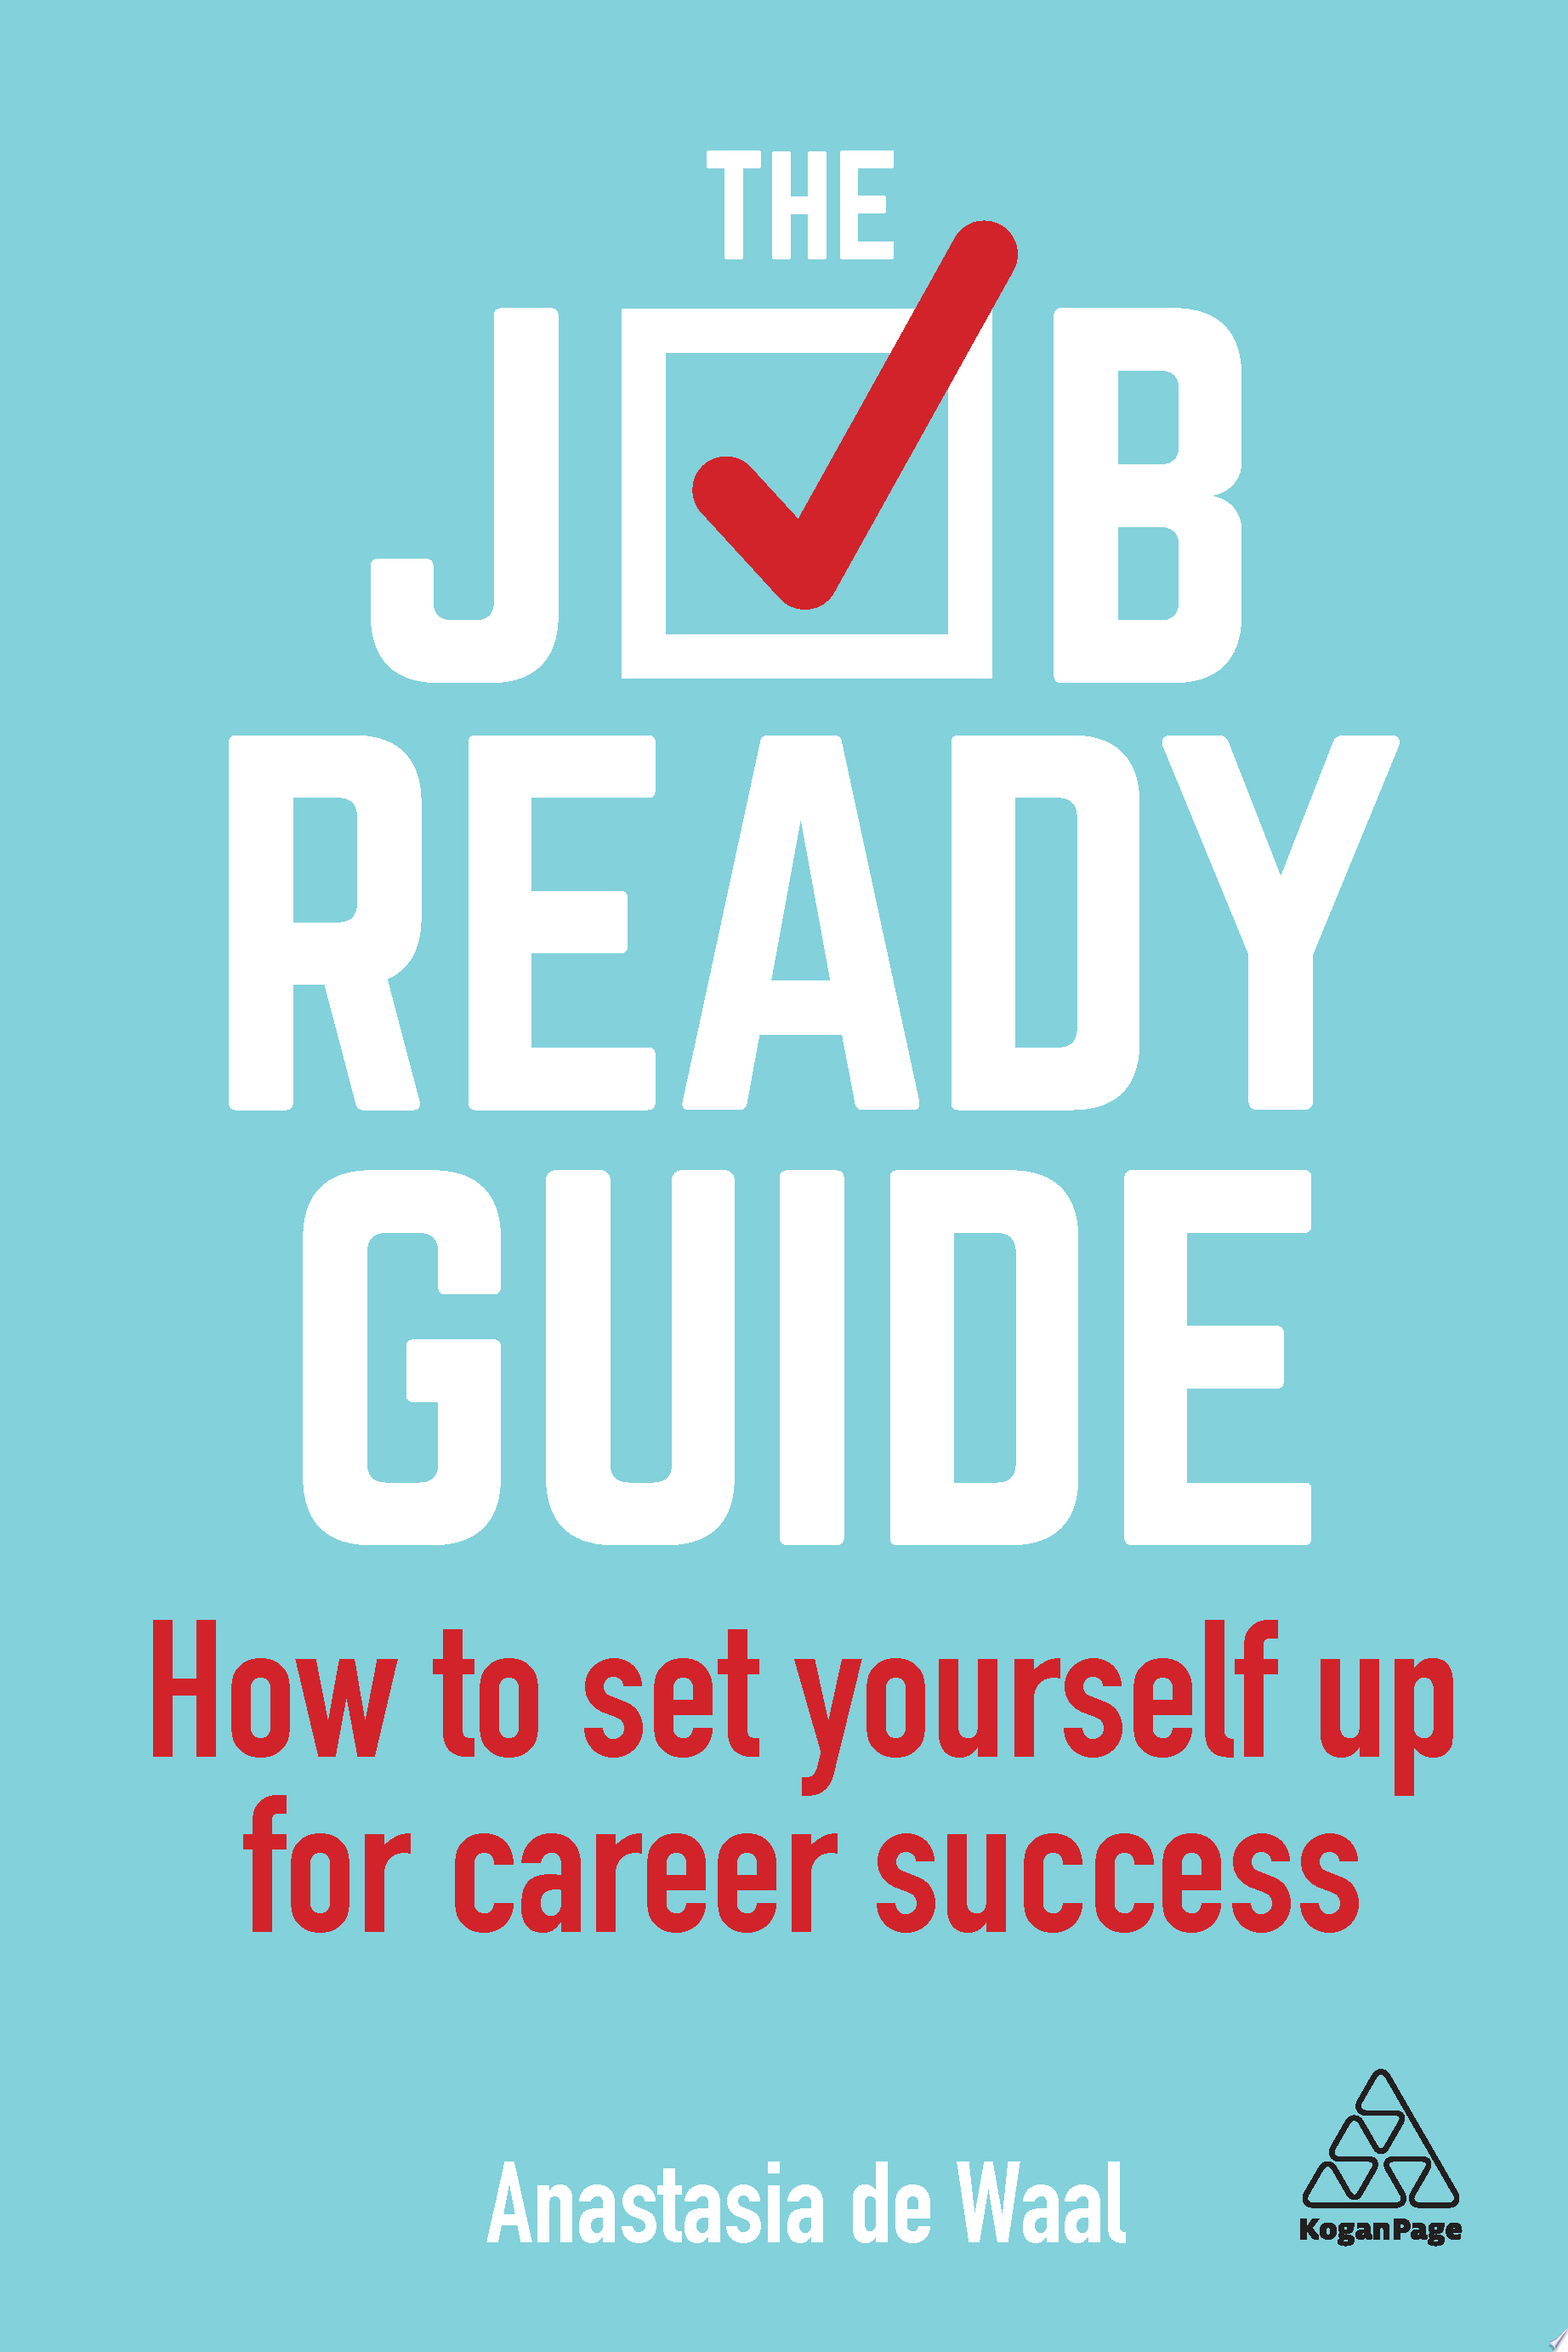 Image for "The Job-Ready Guide"